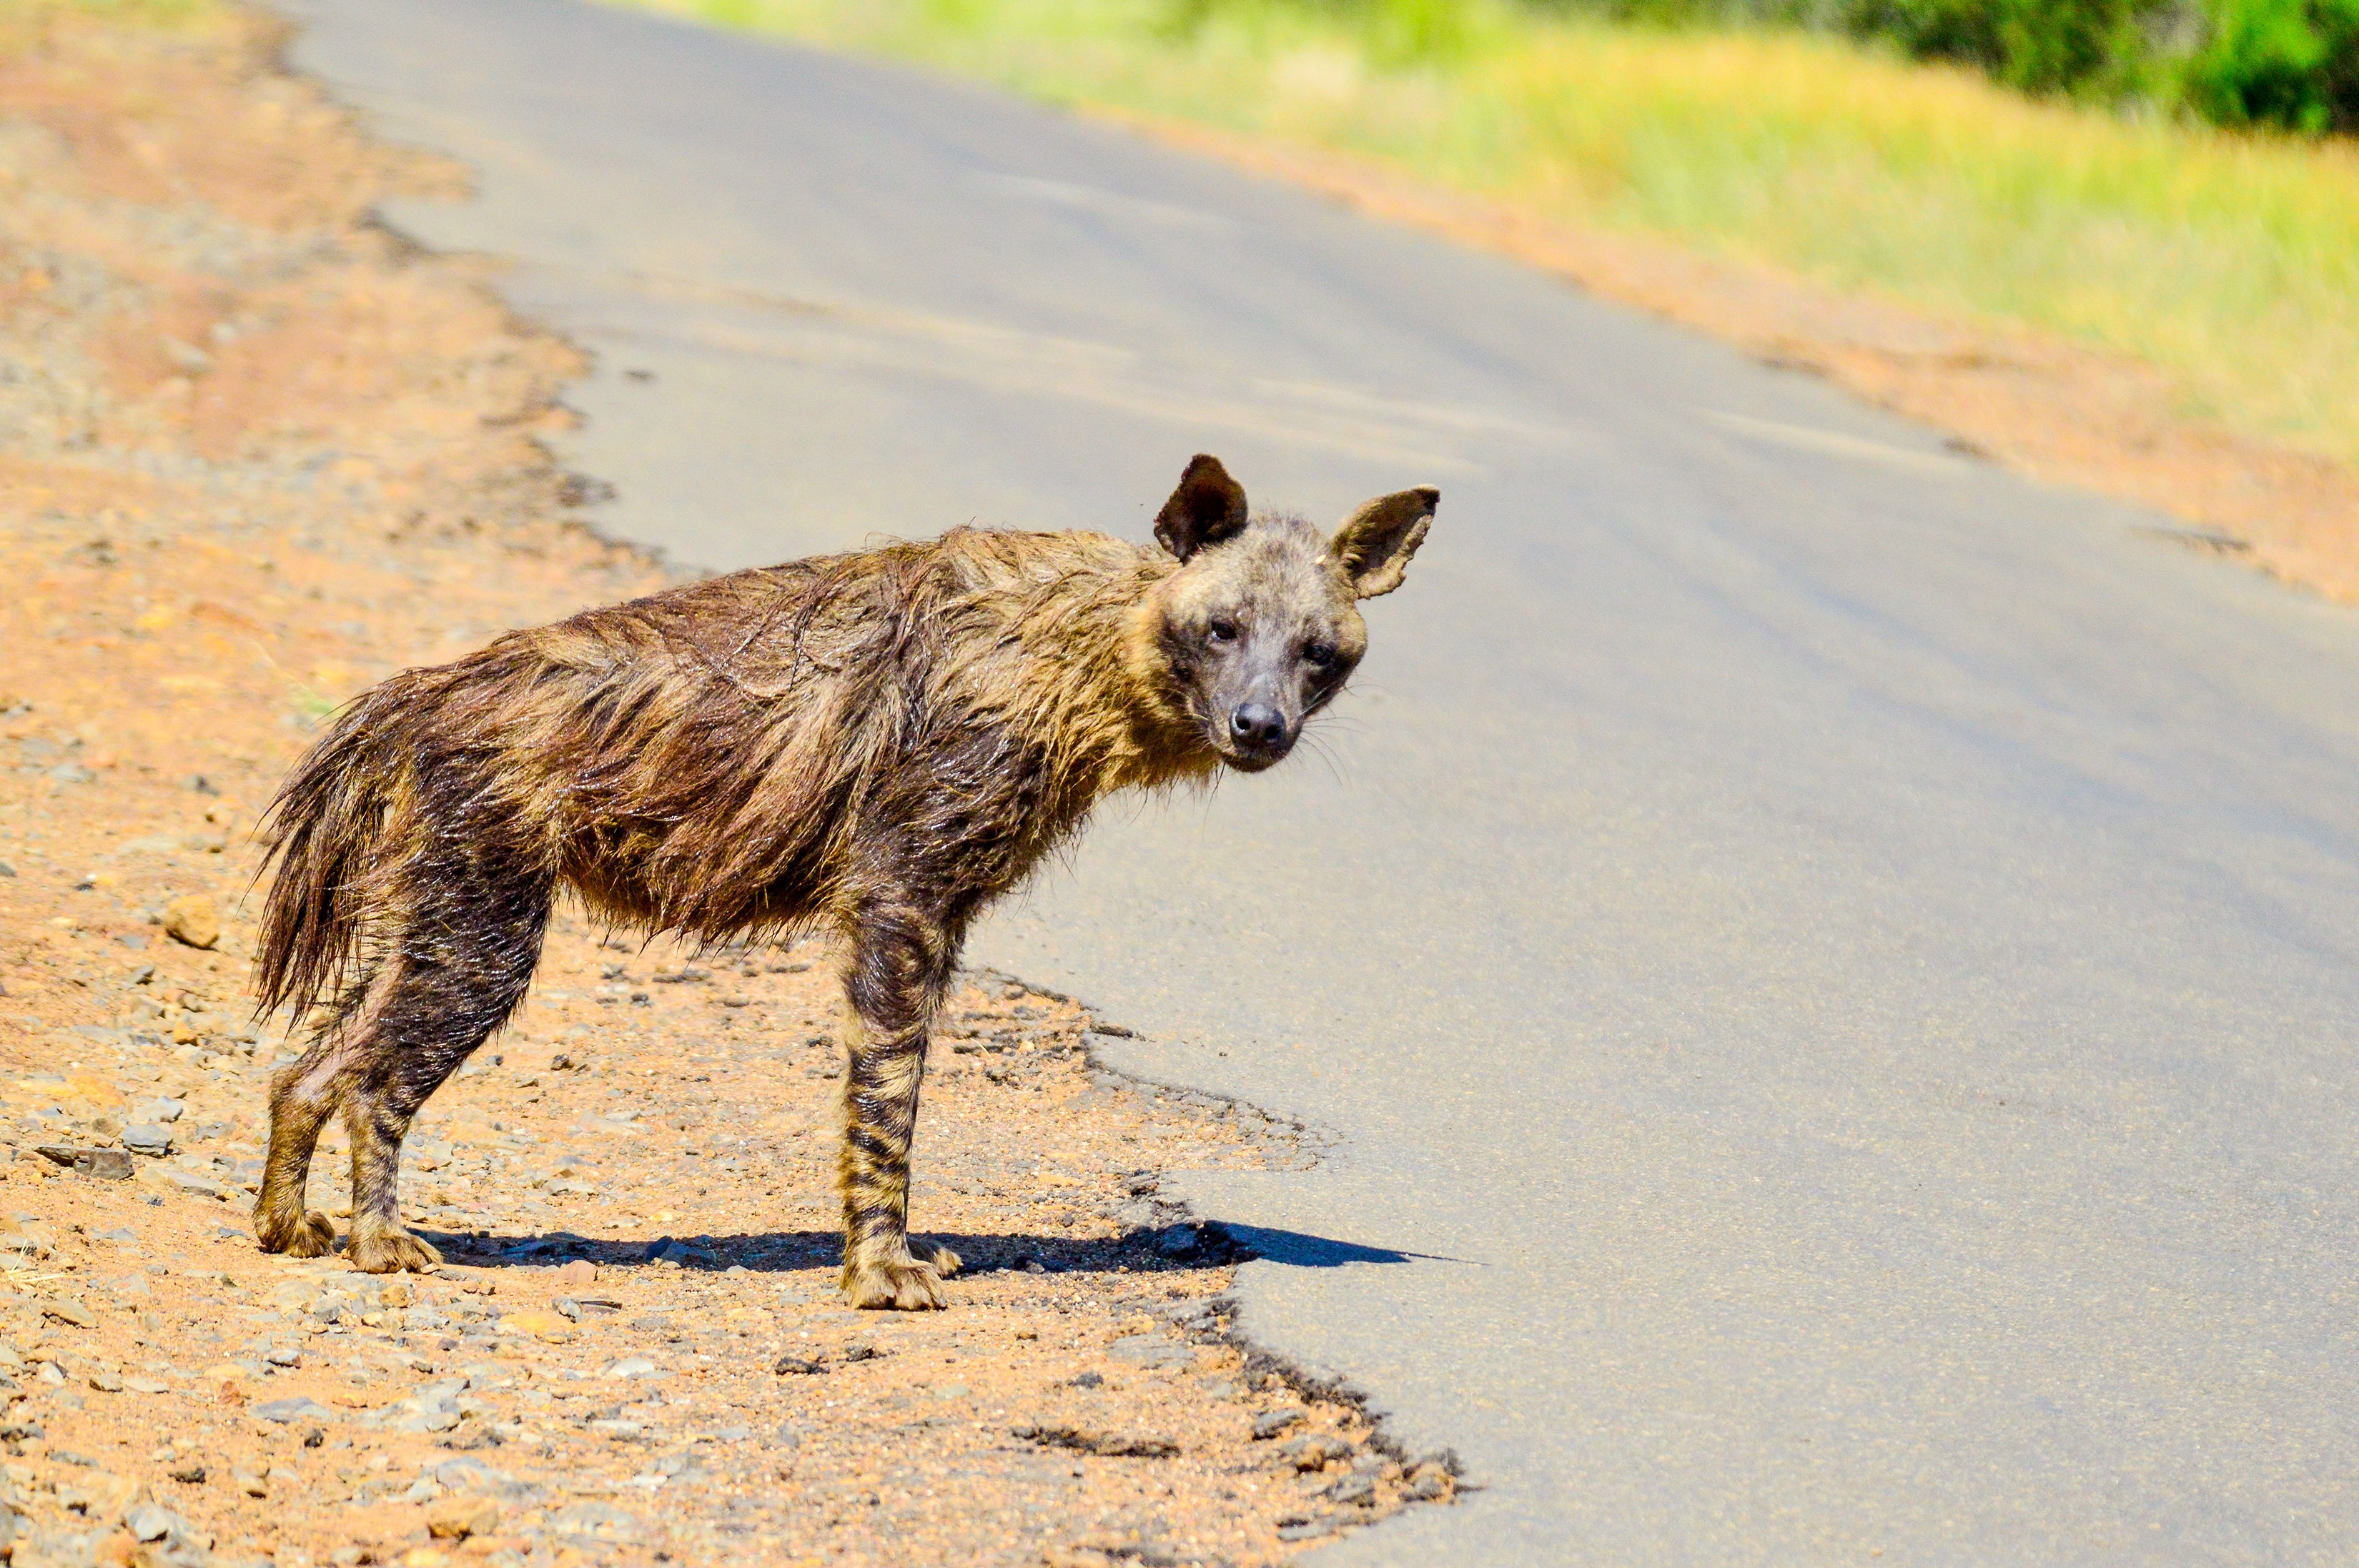 Roadkill Literally 'Drives' Some Species to Extinction - Scientific American